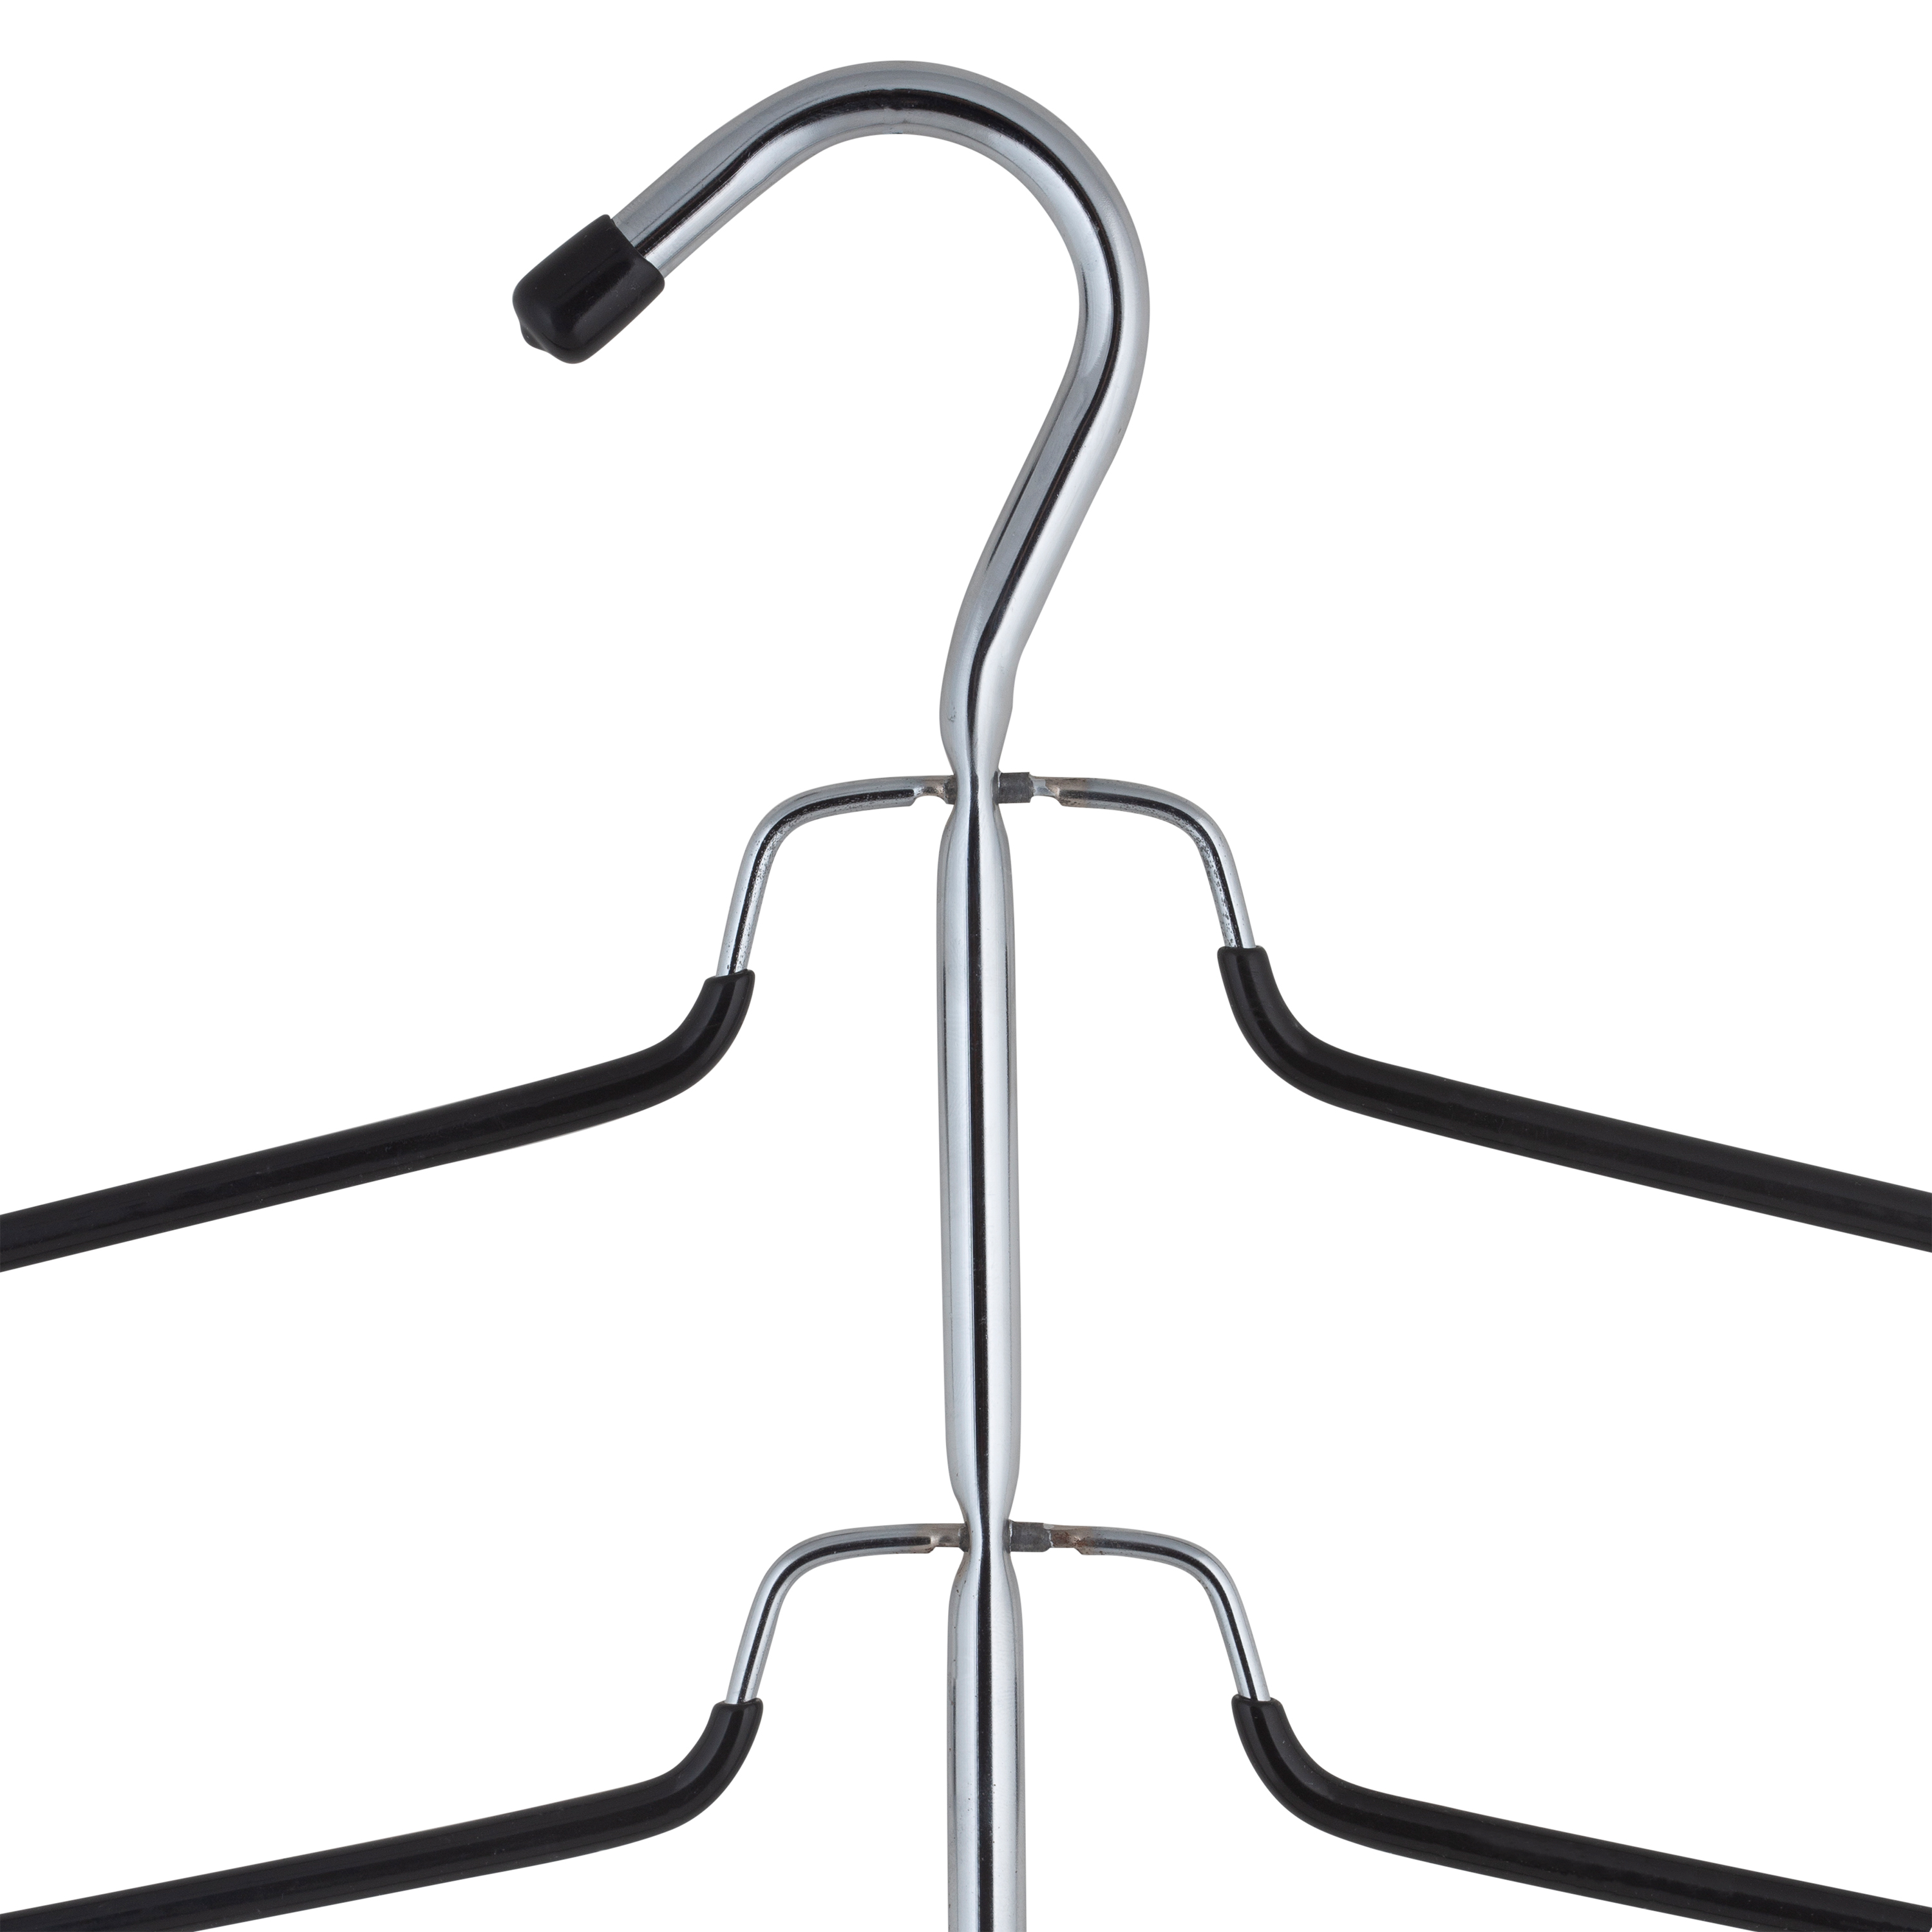 Organize It All 6 Tier Blouse Tree Metal Clothes Shirt Hanger in Chrome - image 5 of 7